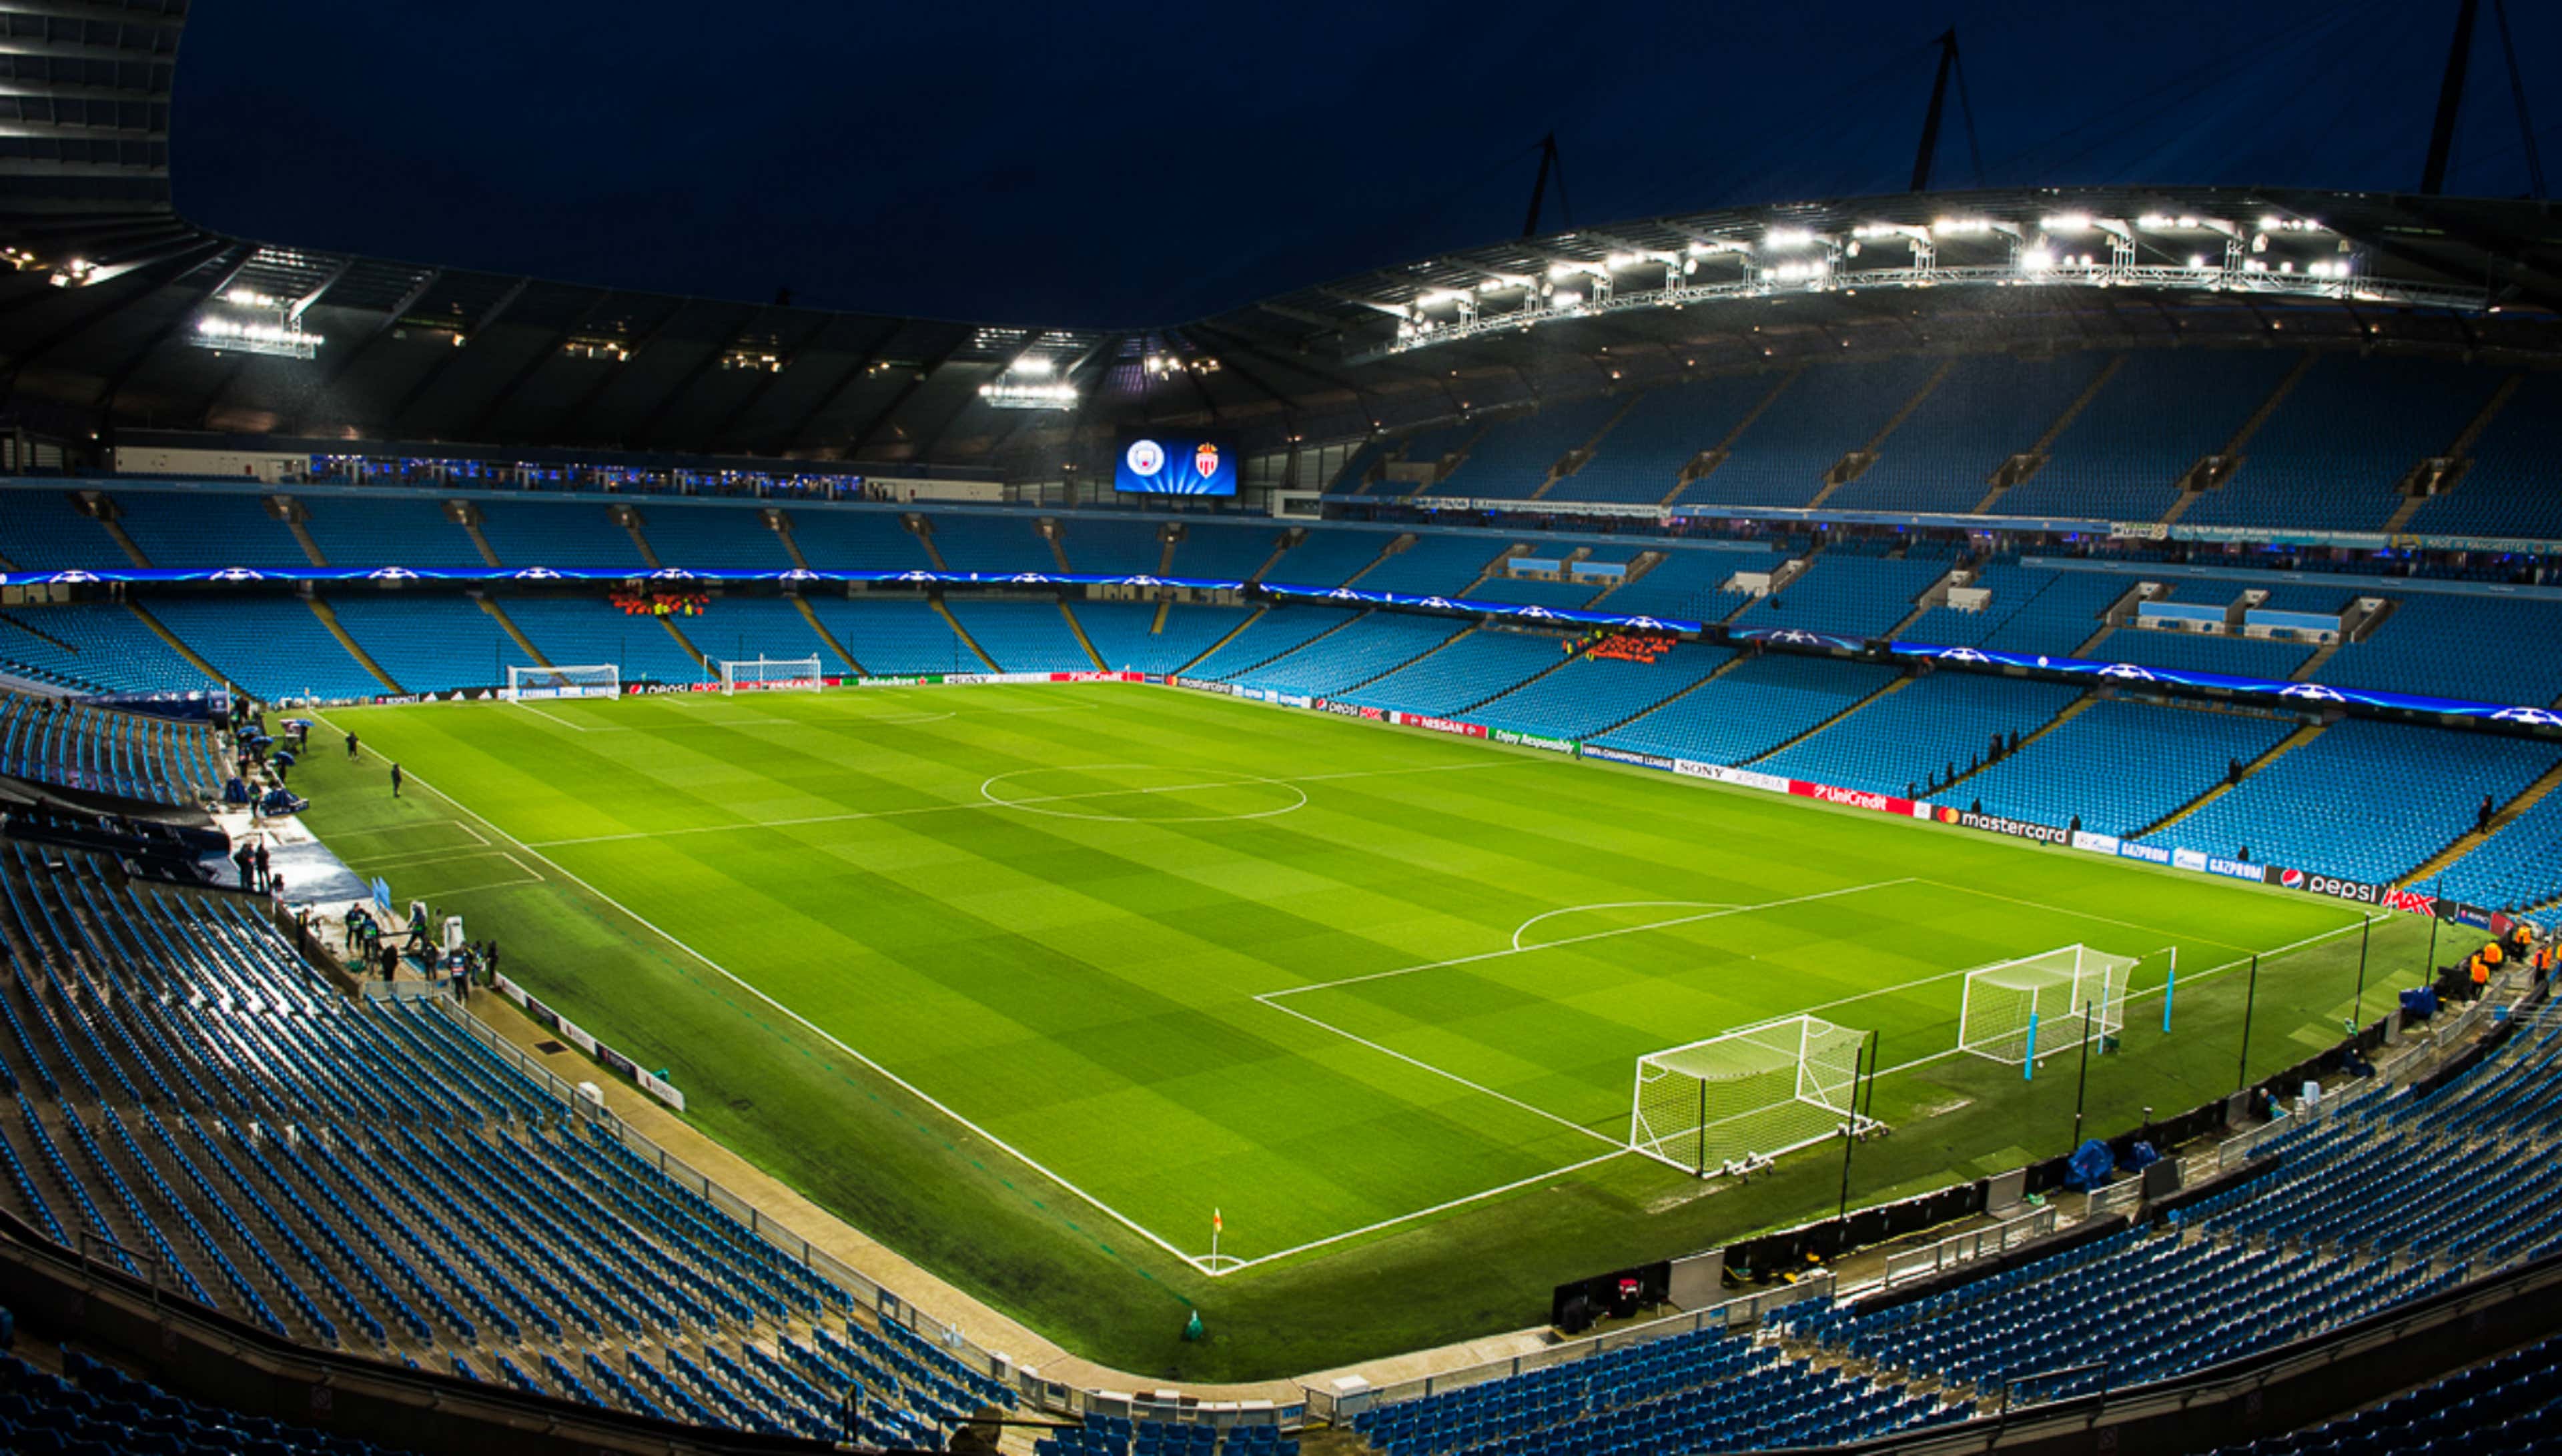 The Etihad Stadium shortly before the Champions League thriller between Manchester City and Monaco